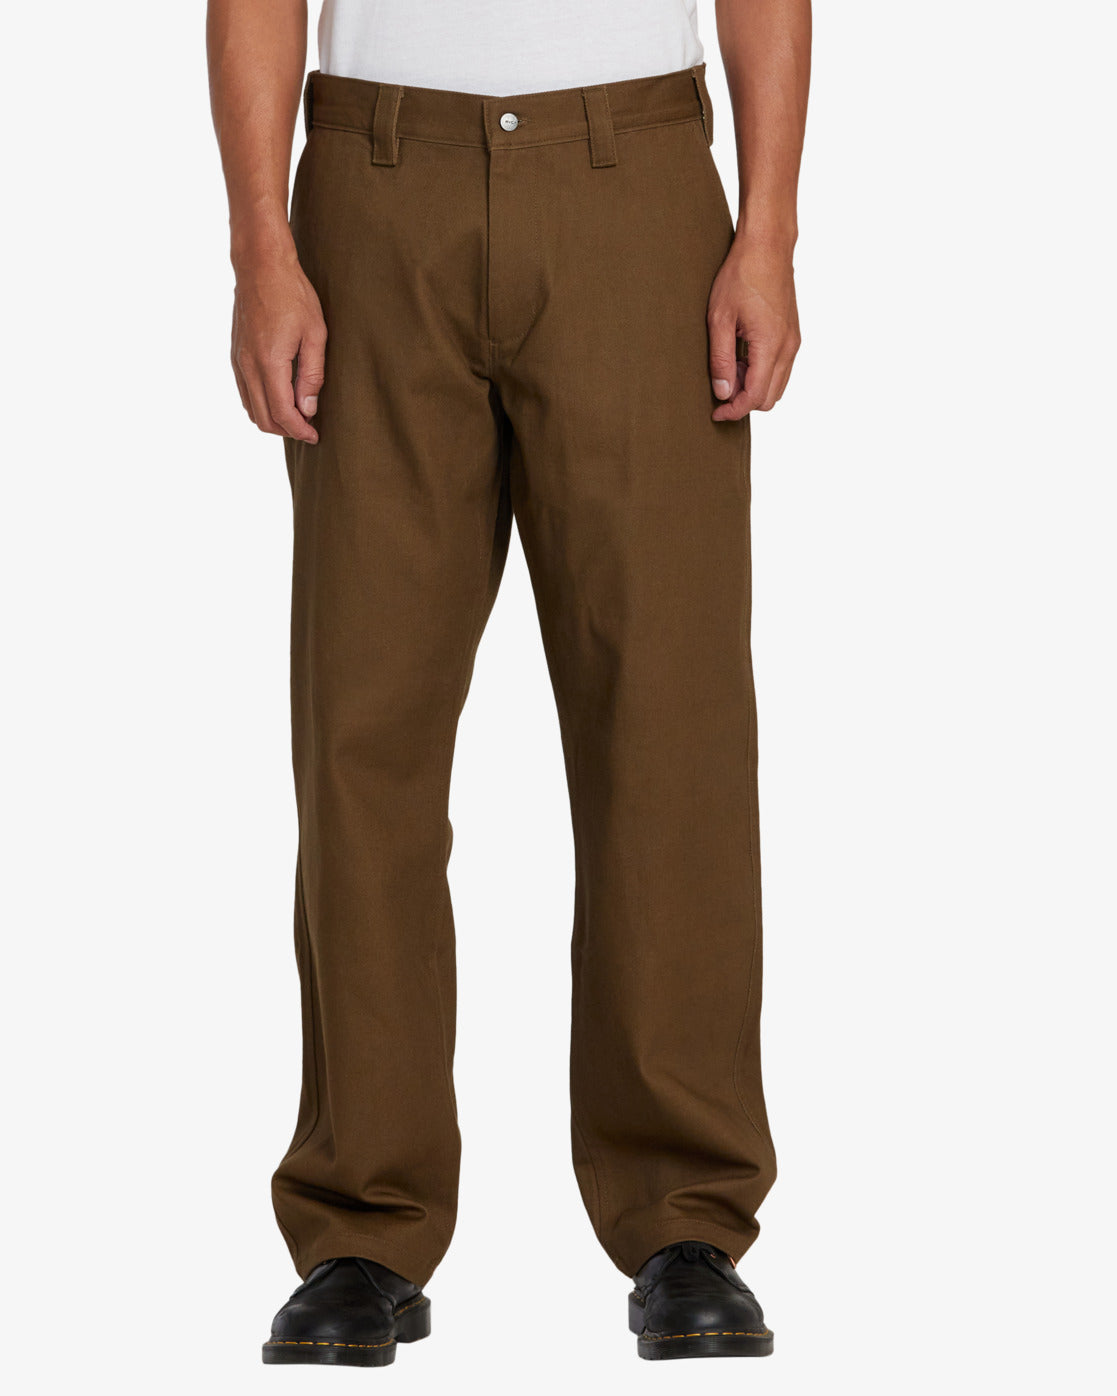 RVCA Americana Chino Pants in bombay brown from front